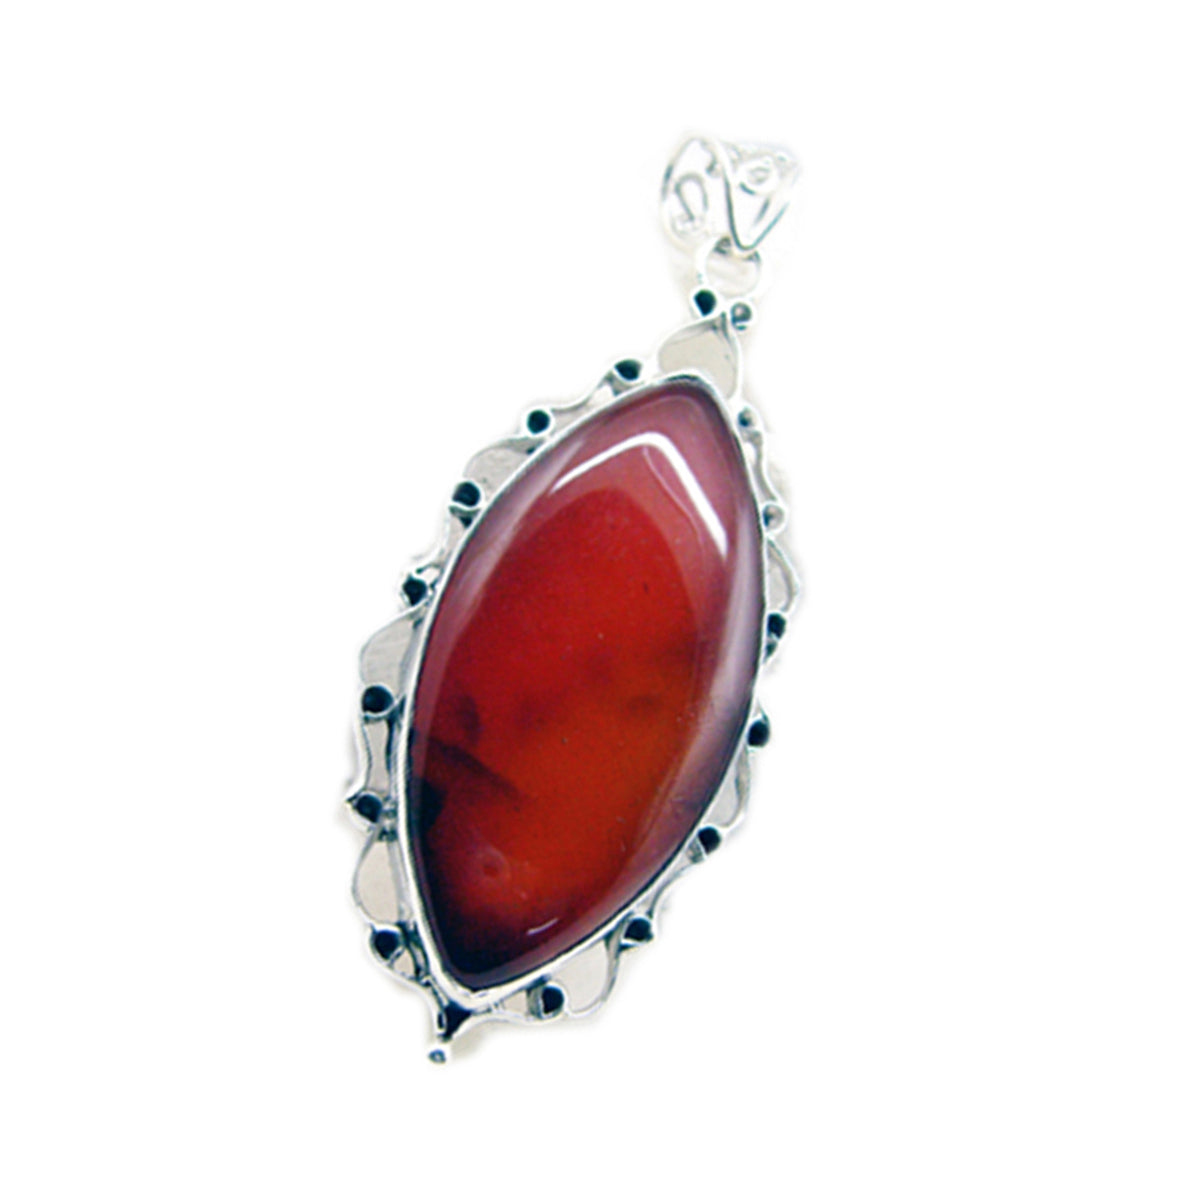 Riyo Handsome Gemstone Marquise Cabochon Red Red Onyx 1161 Sterling Silver Pendant Gift For Birthday